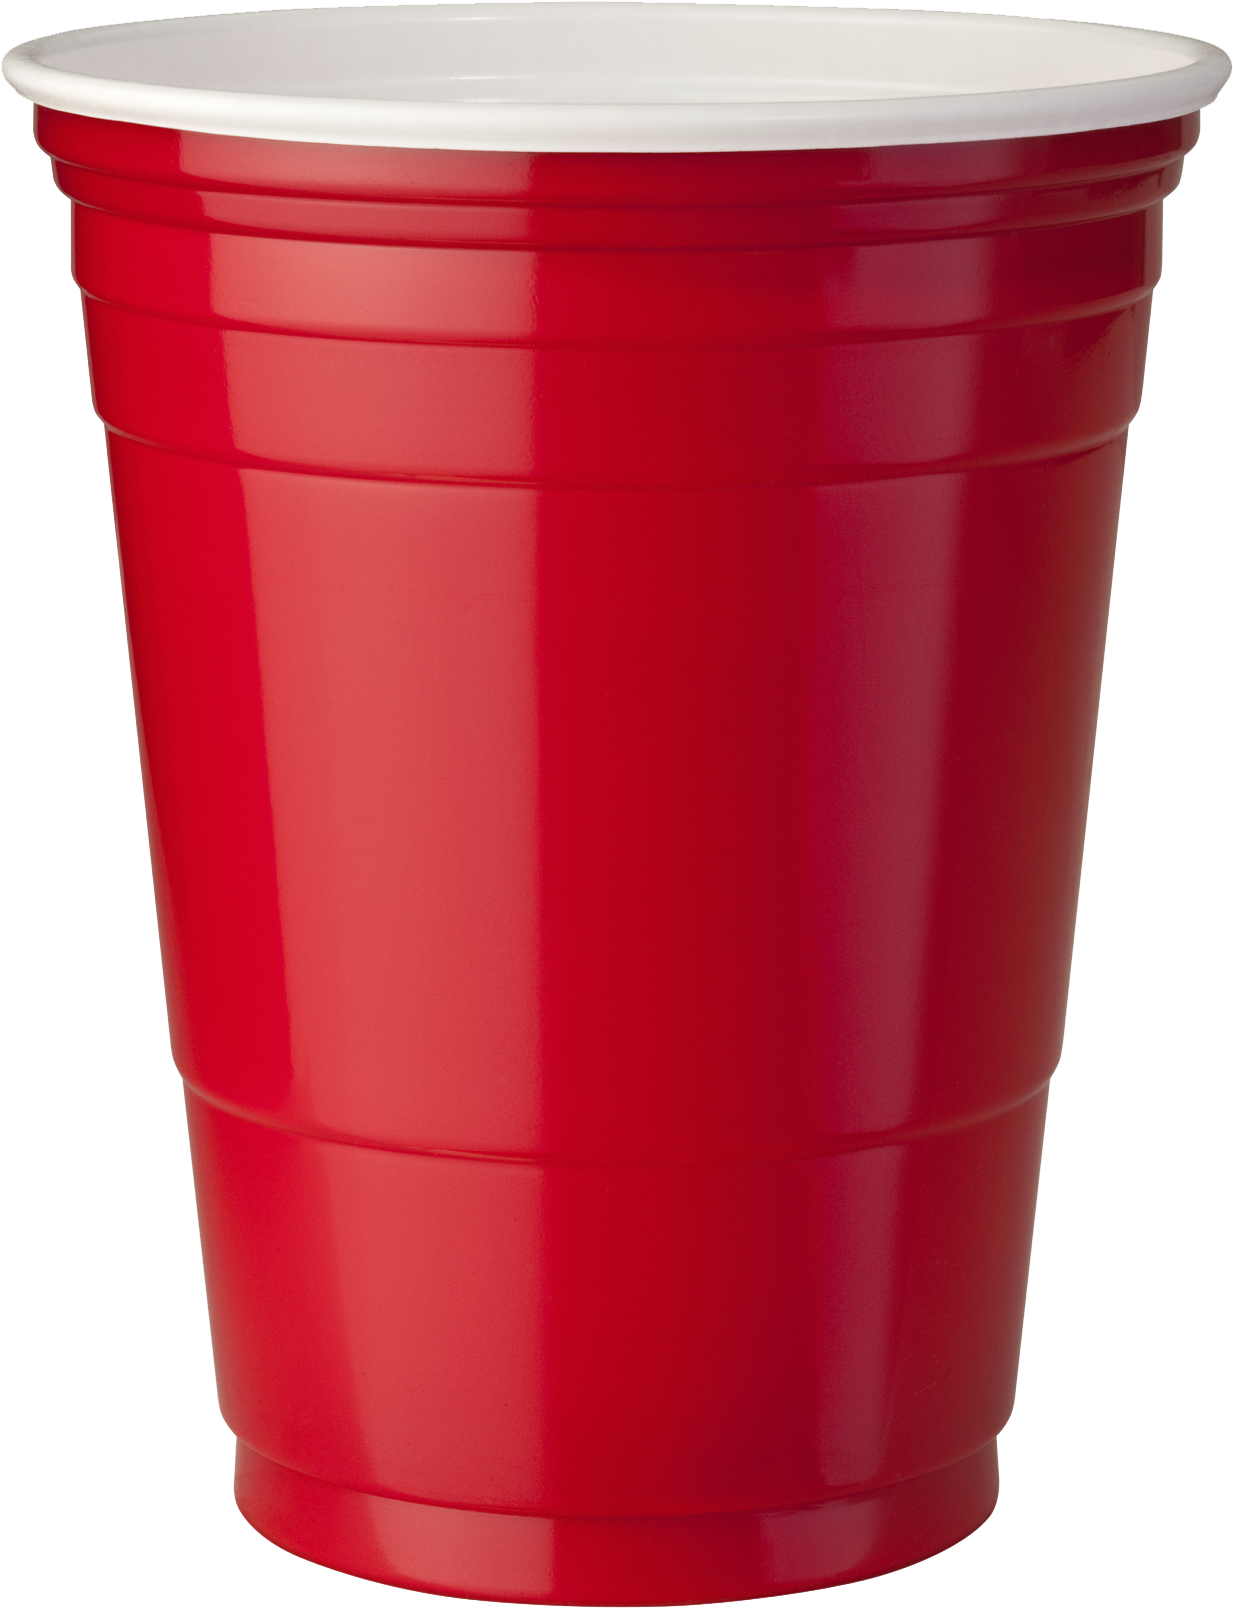 United States Red Solo Cup Plastic Cup Solo Cup Company - Red Solo Cup Transparent (1232x1624)